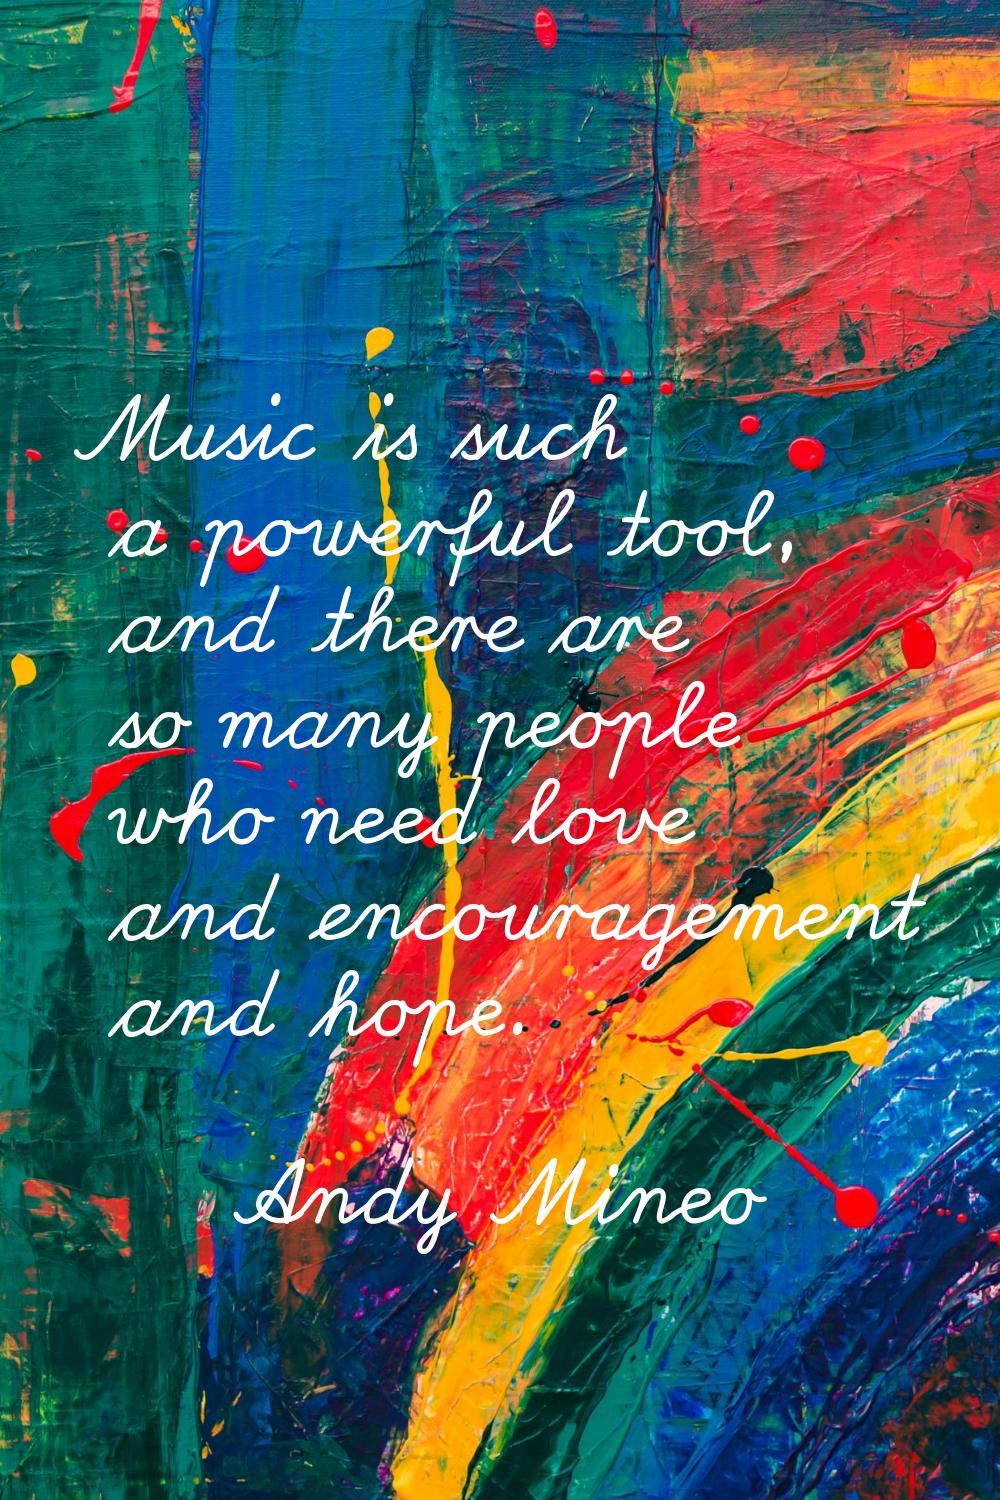 Music is such a powerful tool, and there are so many people who need love and encouragement and hop